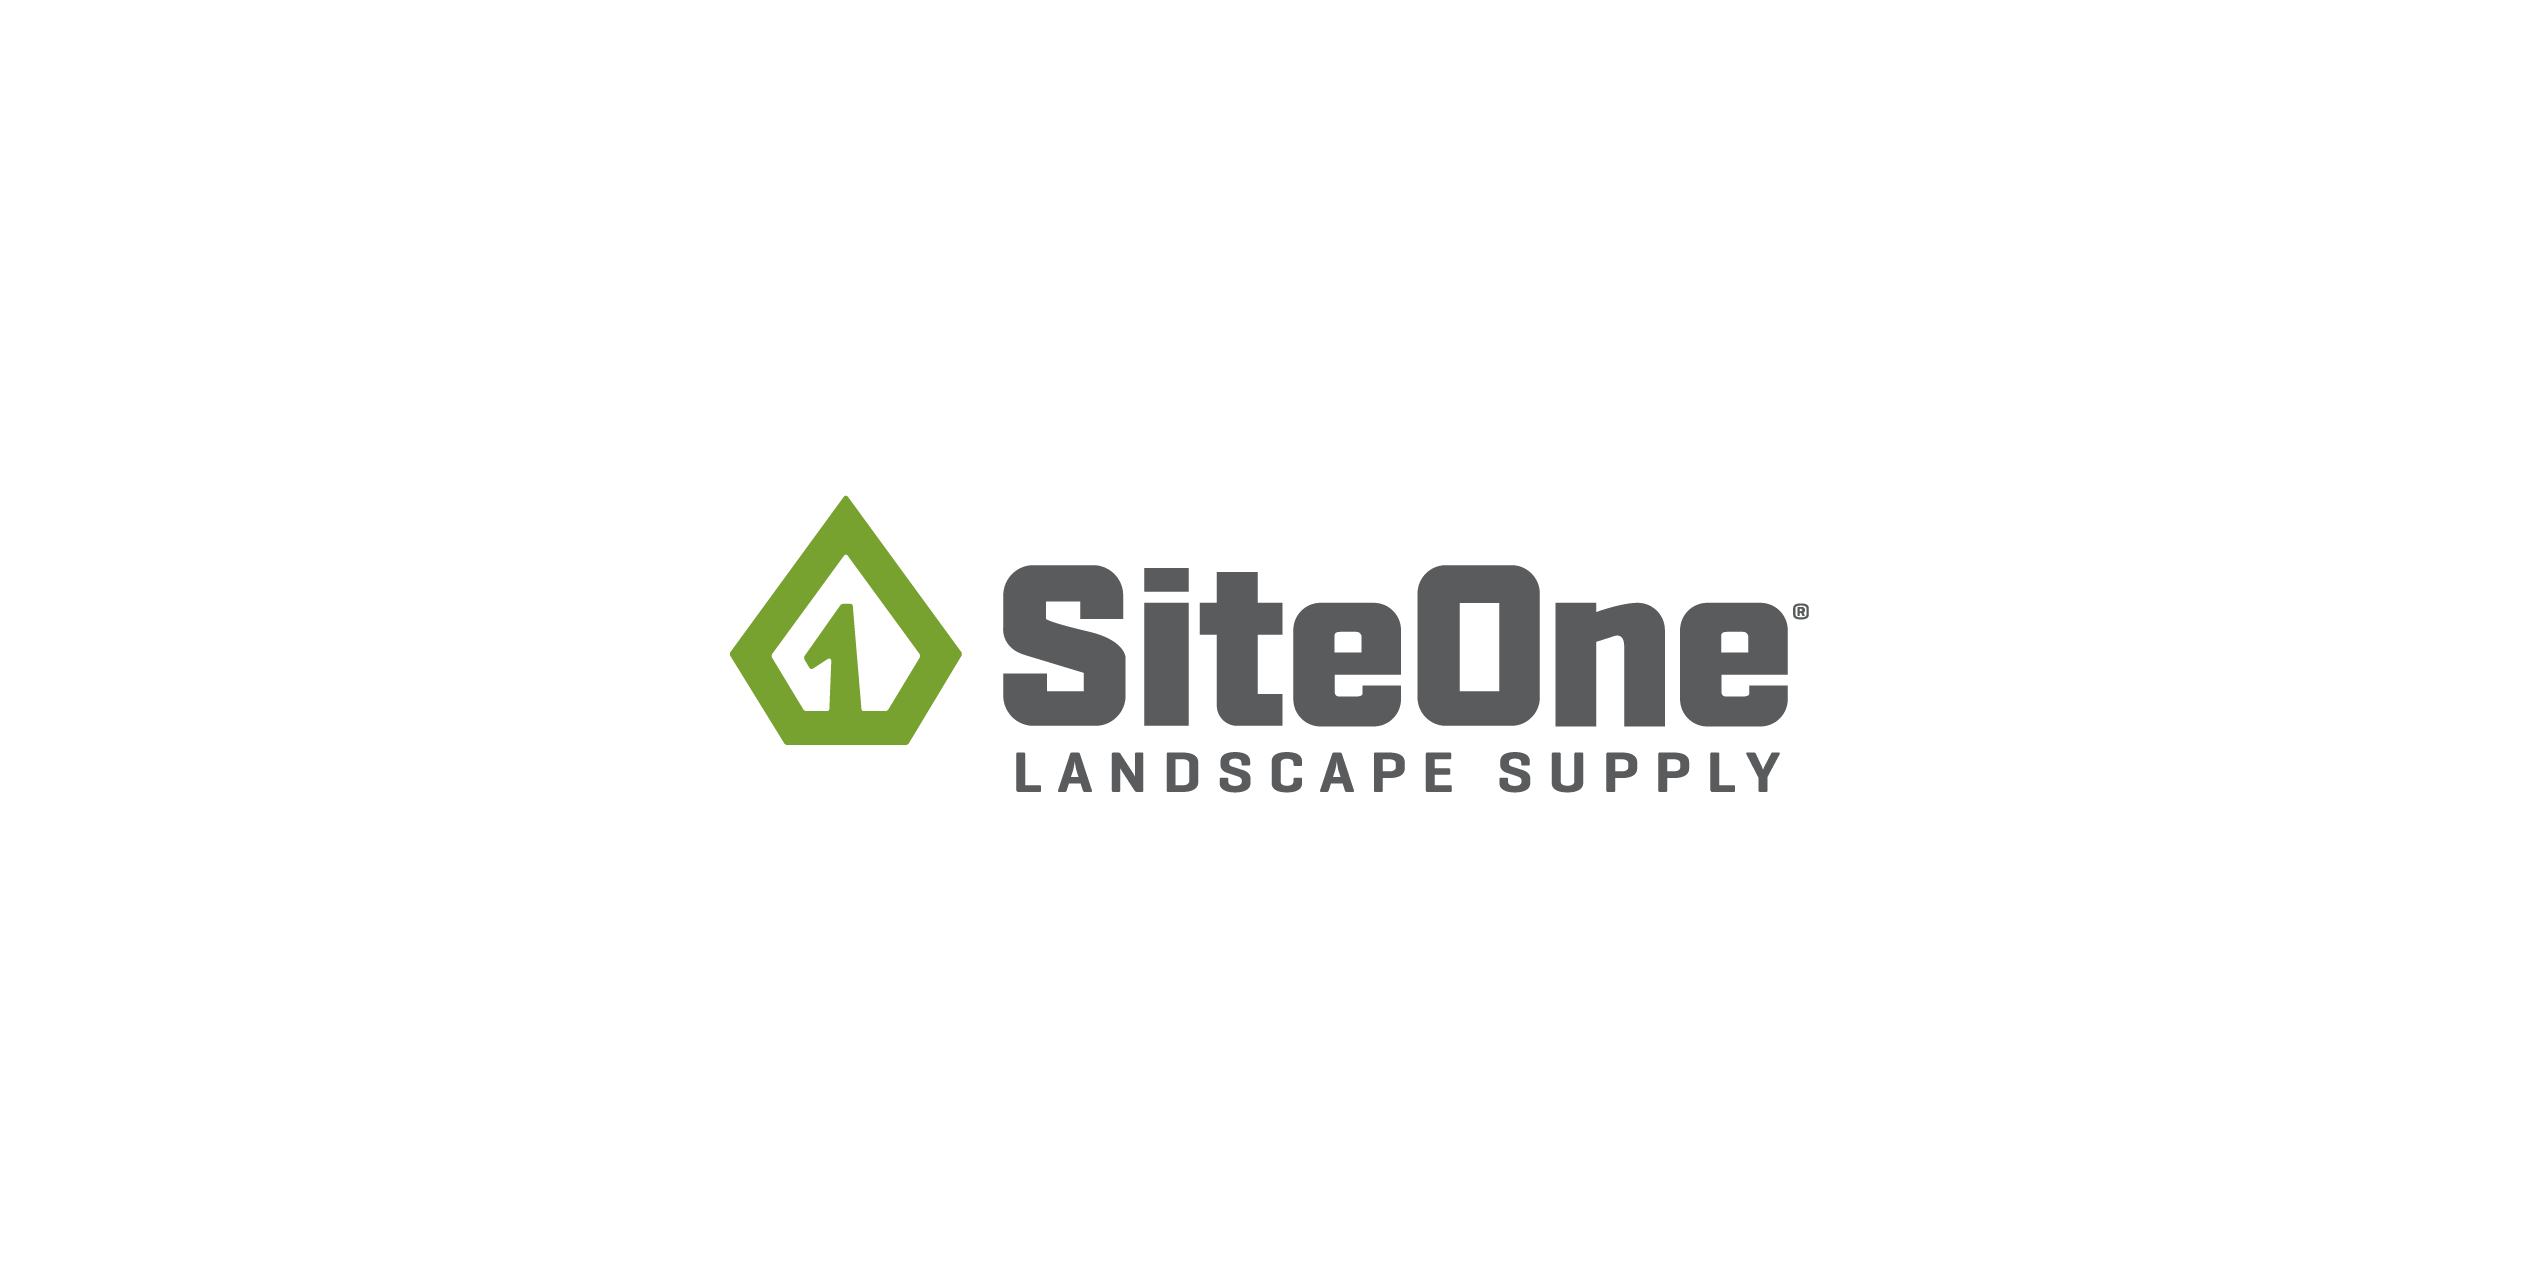 Aspire Software partners with SiteOne Landscape Supply on latest integration